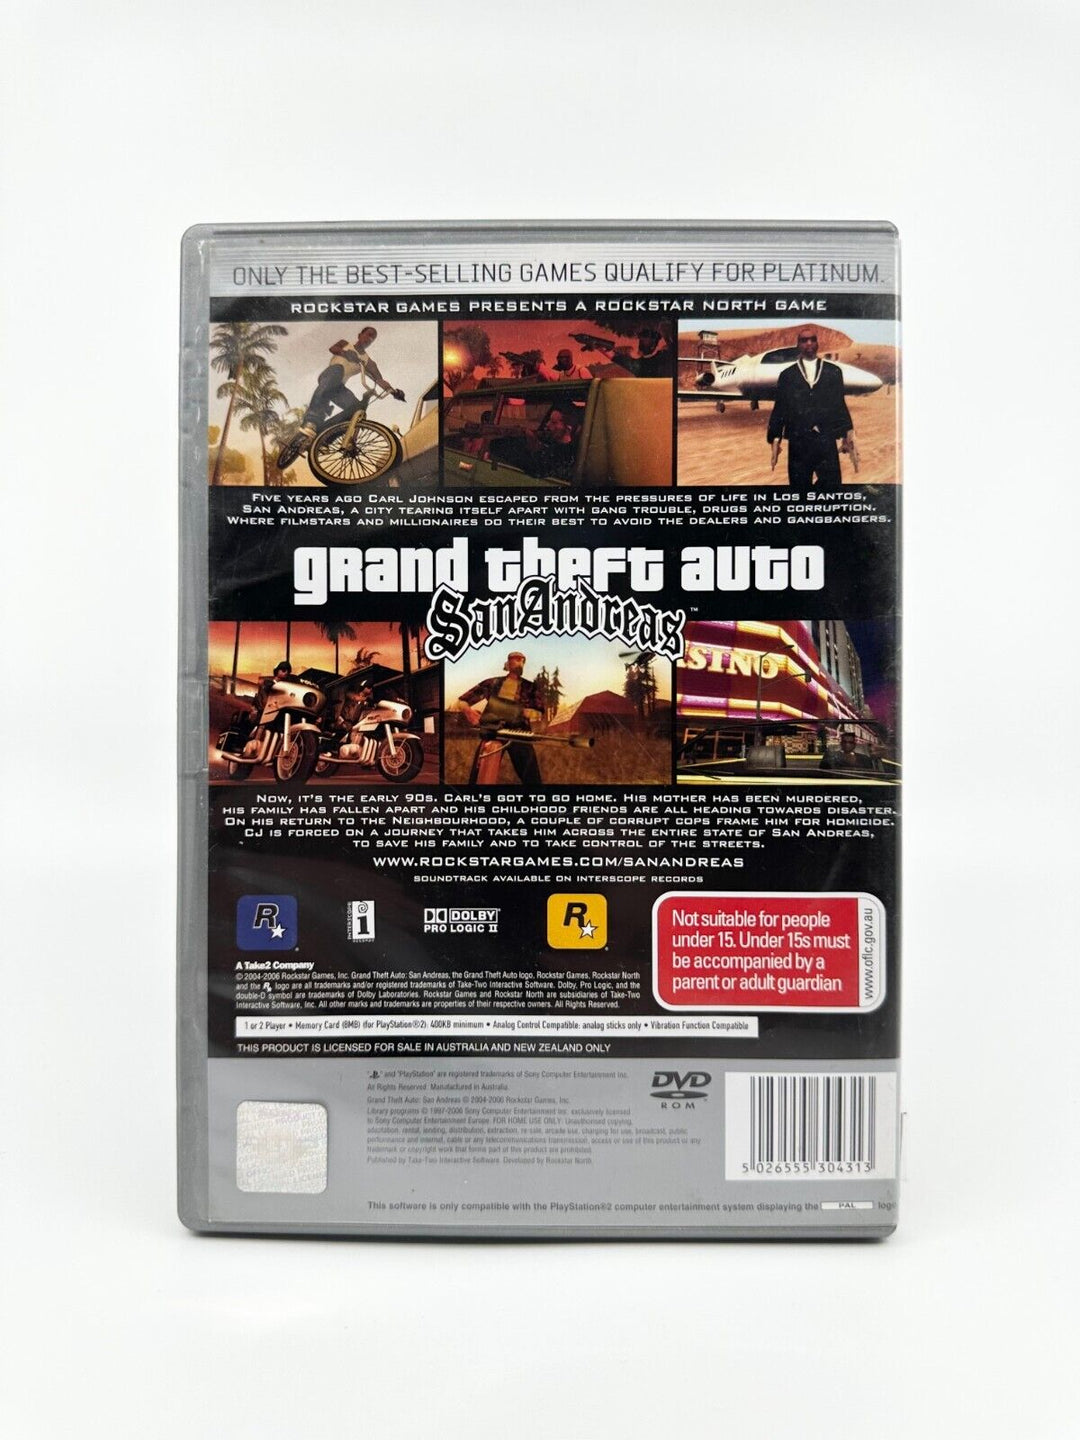 Grand Theft Auto: San Andreas #4 - Sony Playstation 2 / PS2 Game - PAL